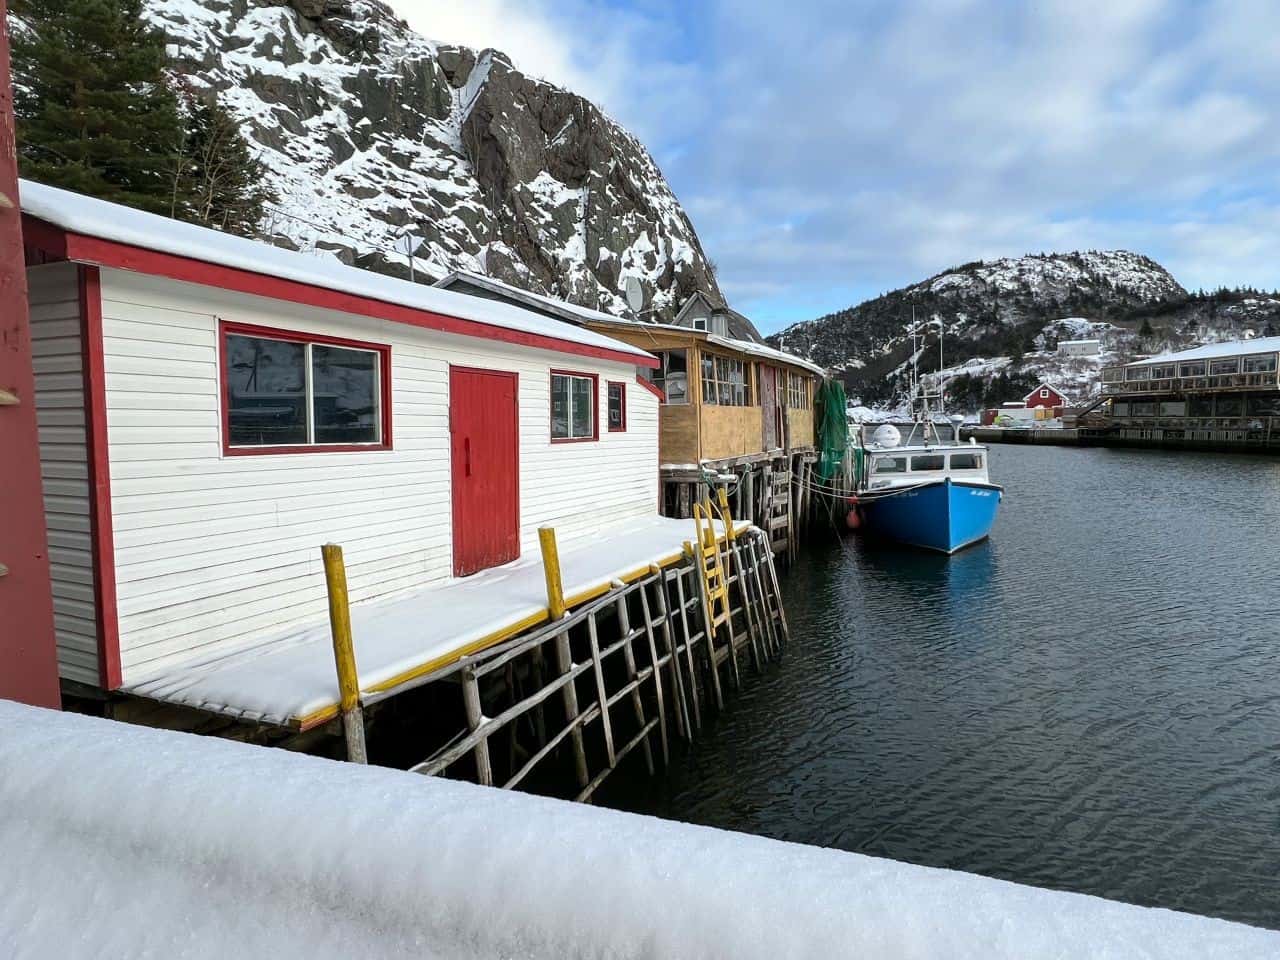 Historical fishing stages along the coastline near St. John’s create a picturesque landscape.